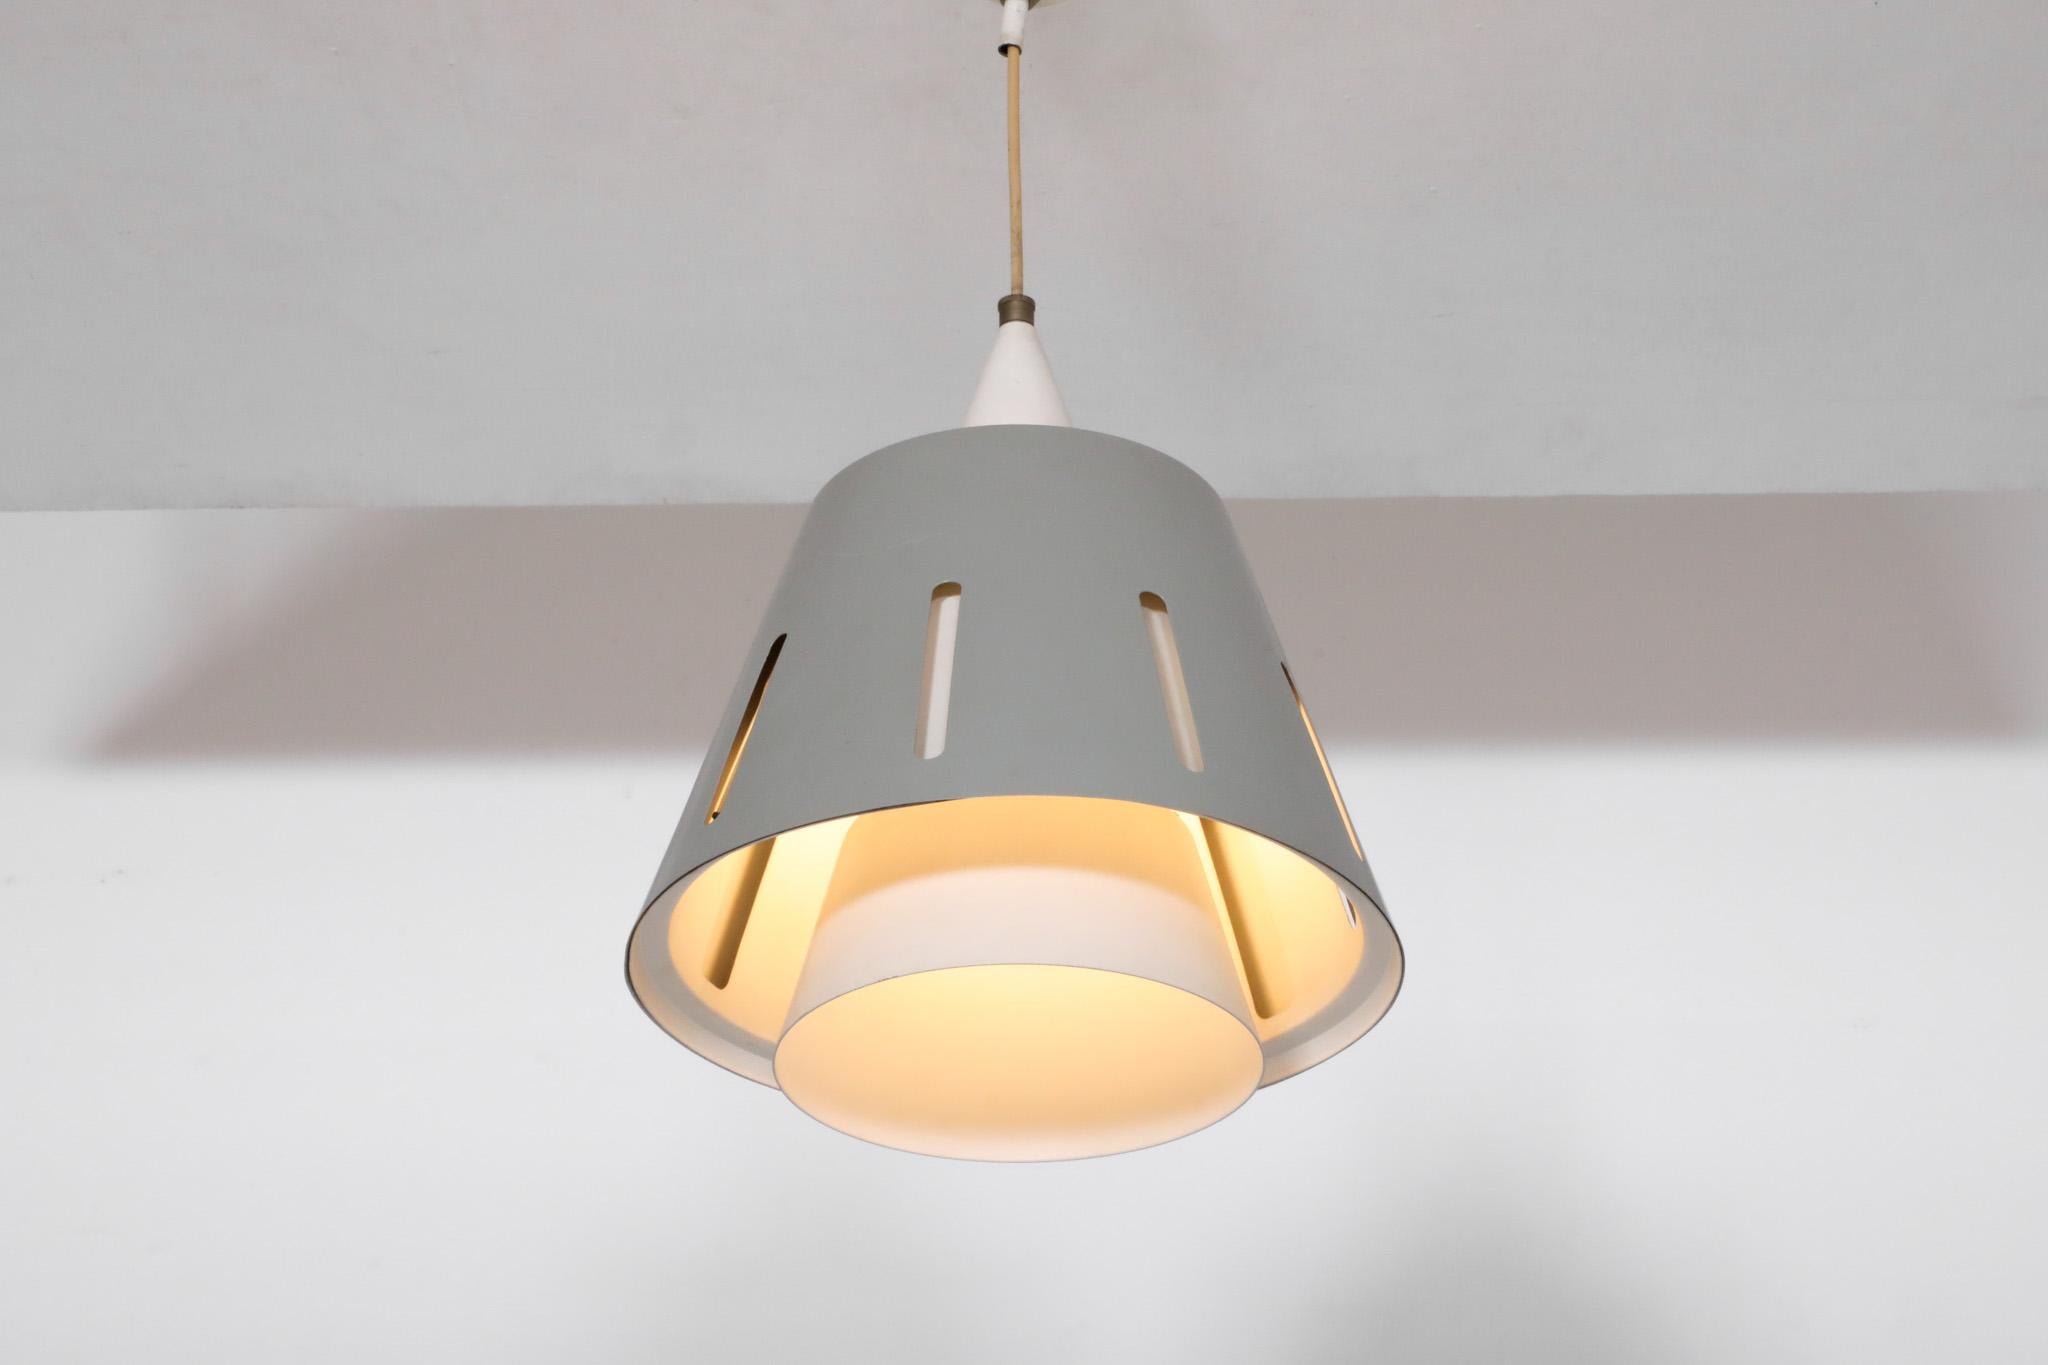 Rare Hala Zeist 'Sun Series' Gray Ceiling Lamp by H. Busquet - 1950s In Good Condition For Sale In Los Angeles, CA